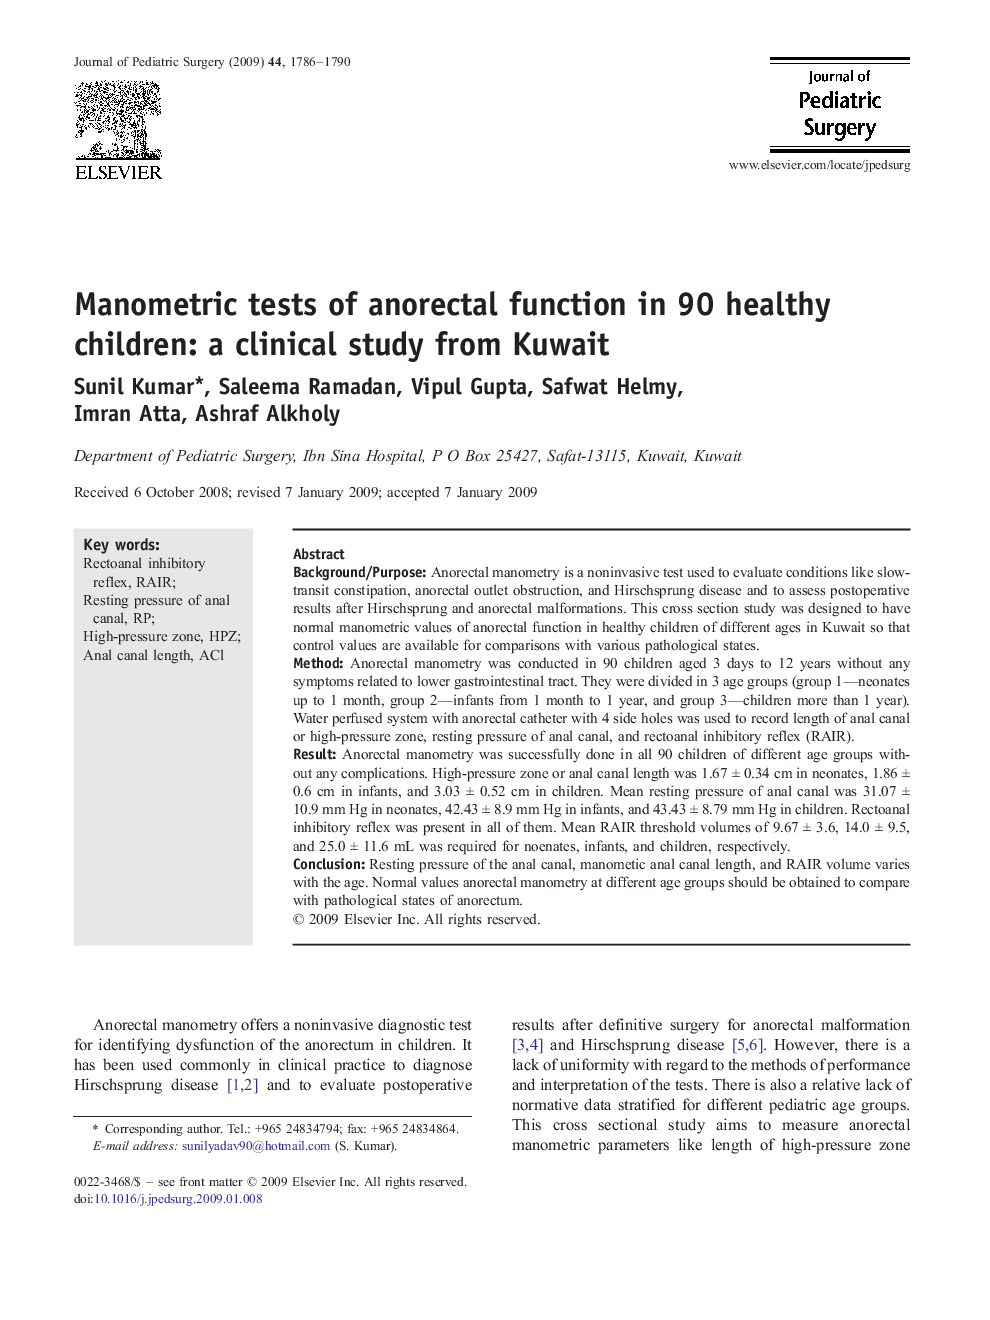 Manometric tests of anorectal function in 90 healthy children: a clinical study from Kuwait